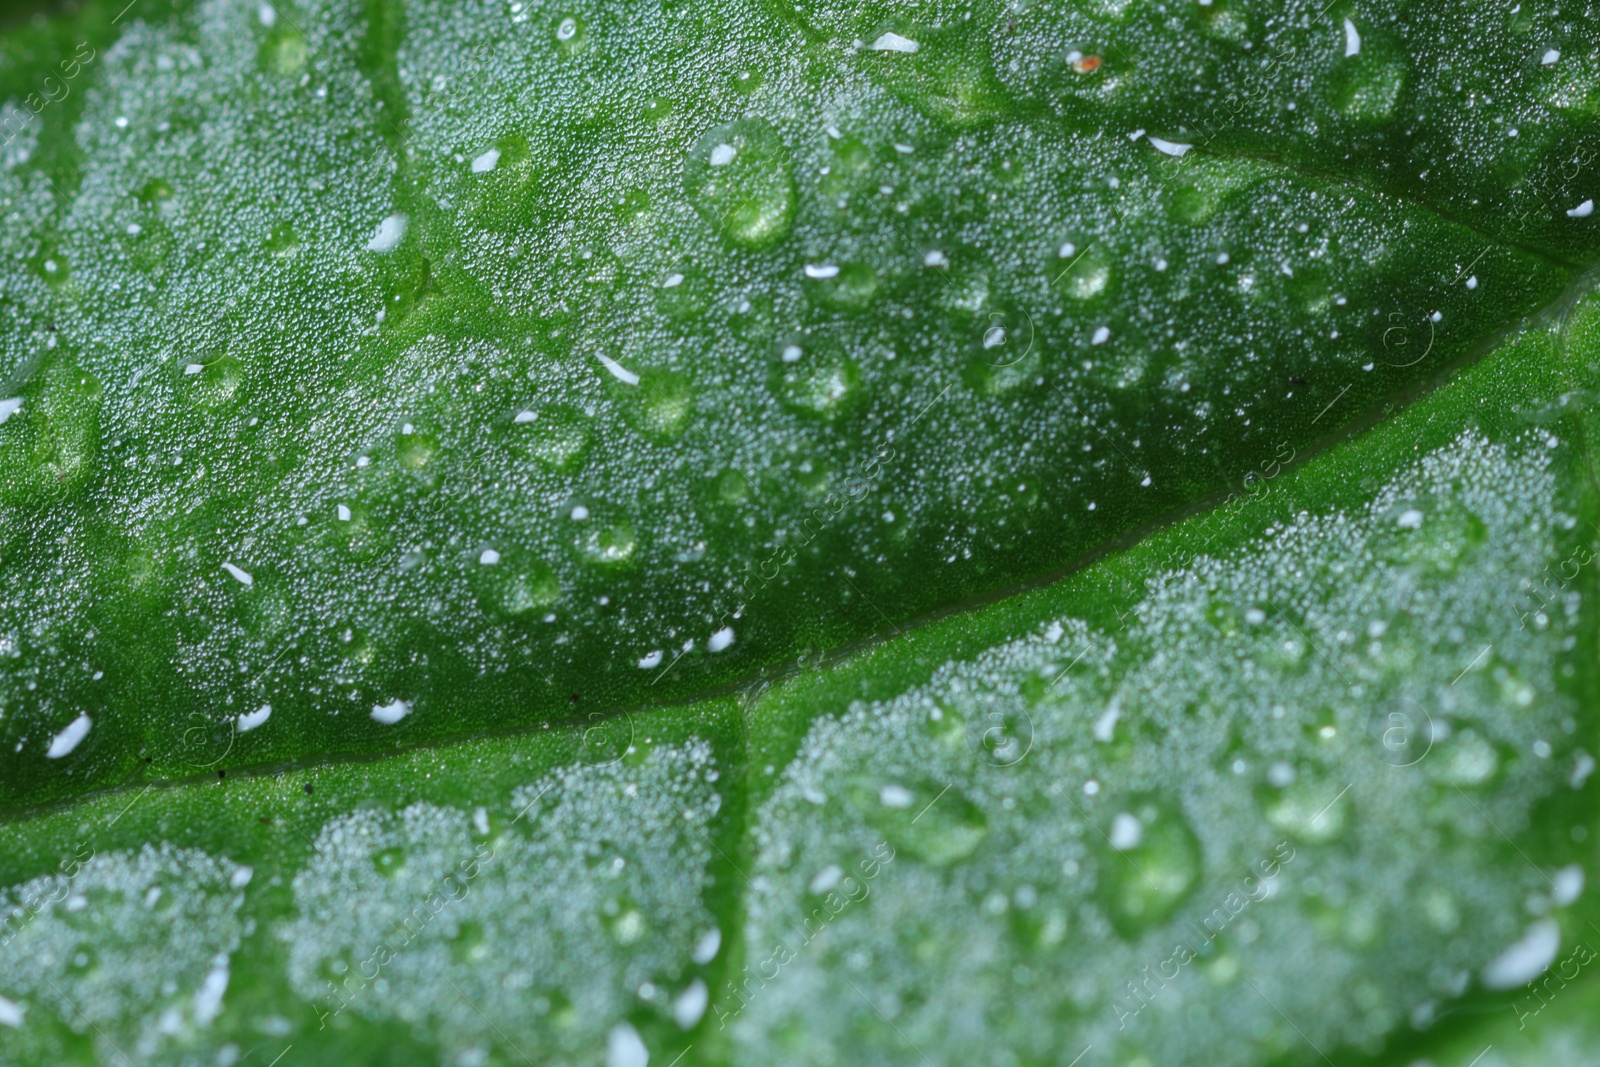 Photo of Texture of green leaf with water drops as background, macro view